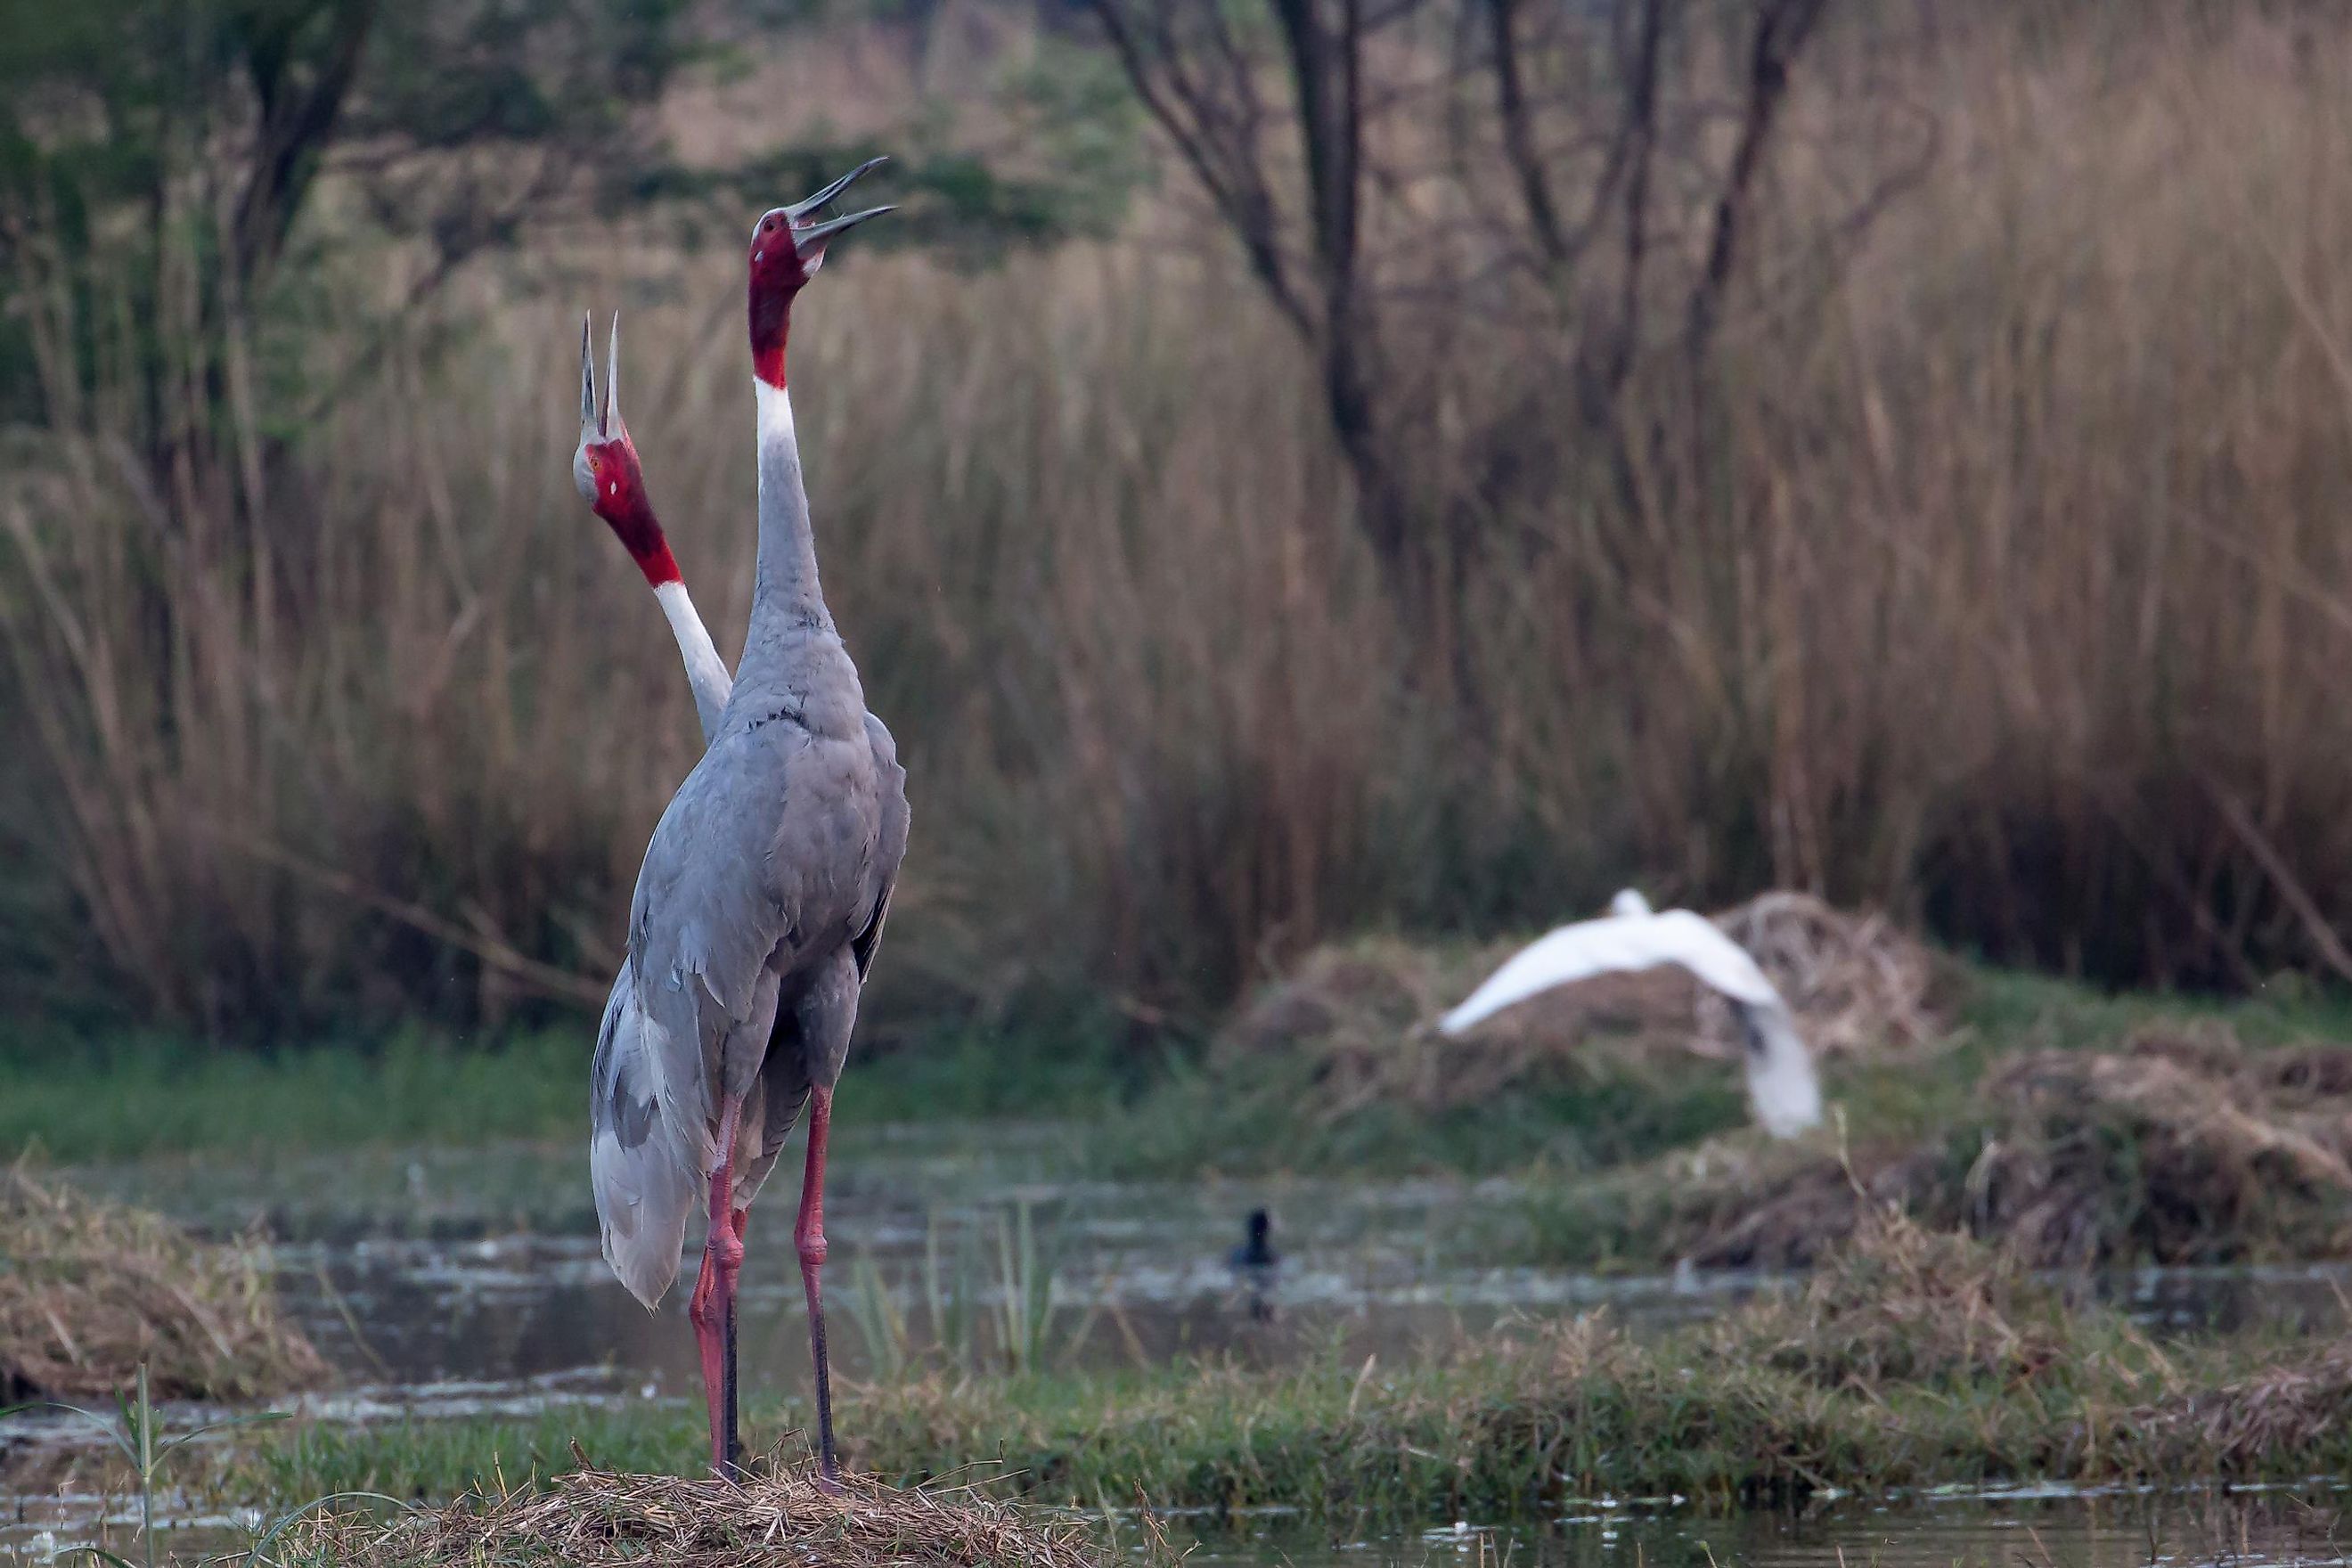 A pair of sarus cranes in the Sultanpur National Park. Image credit: Sanchi Aggarwal